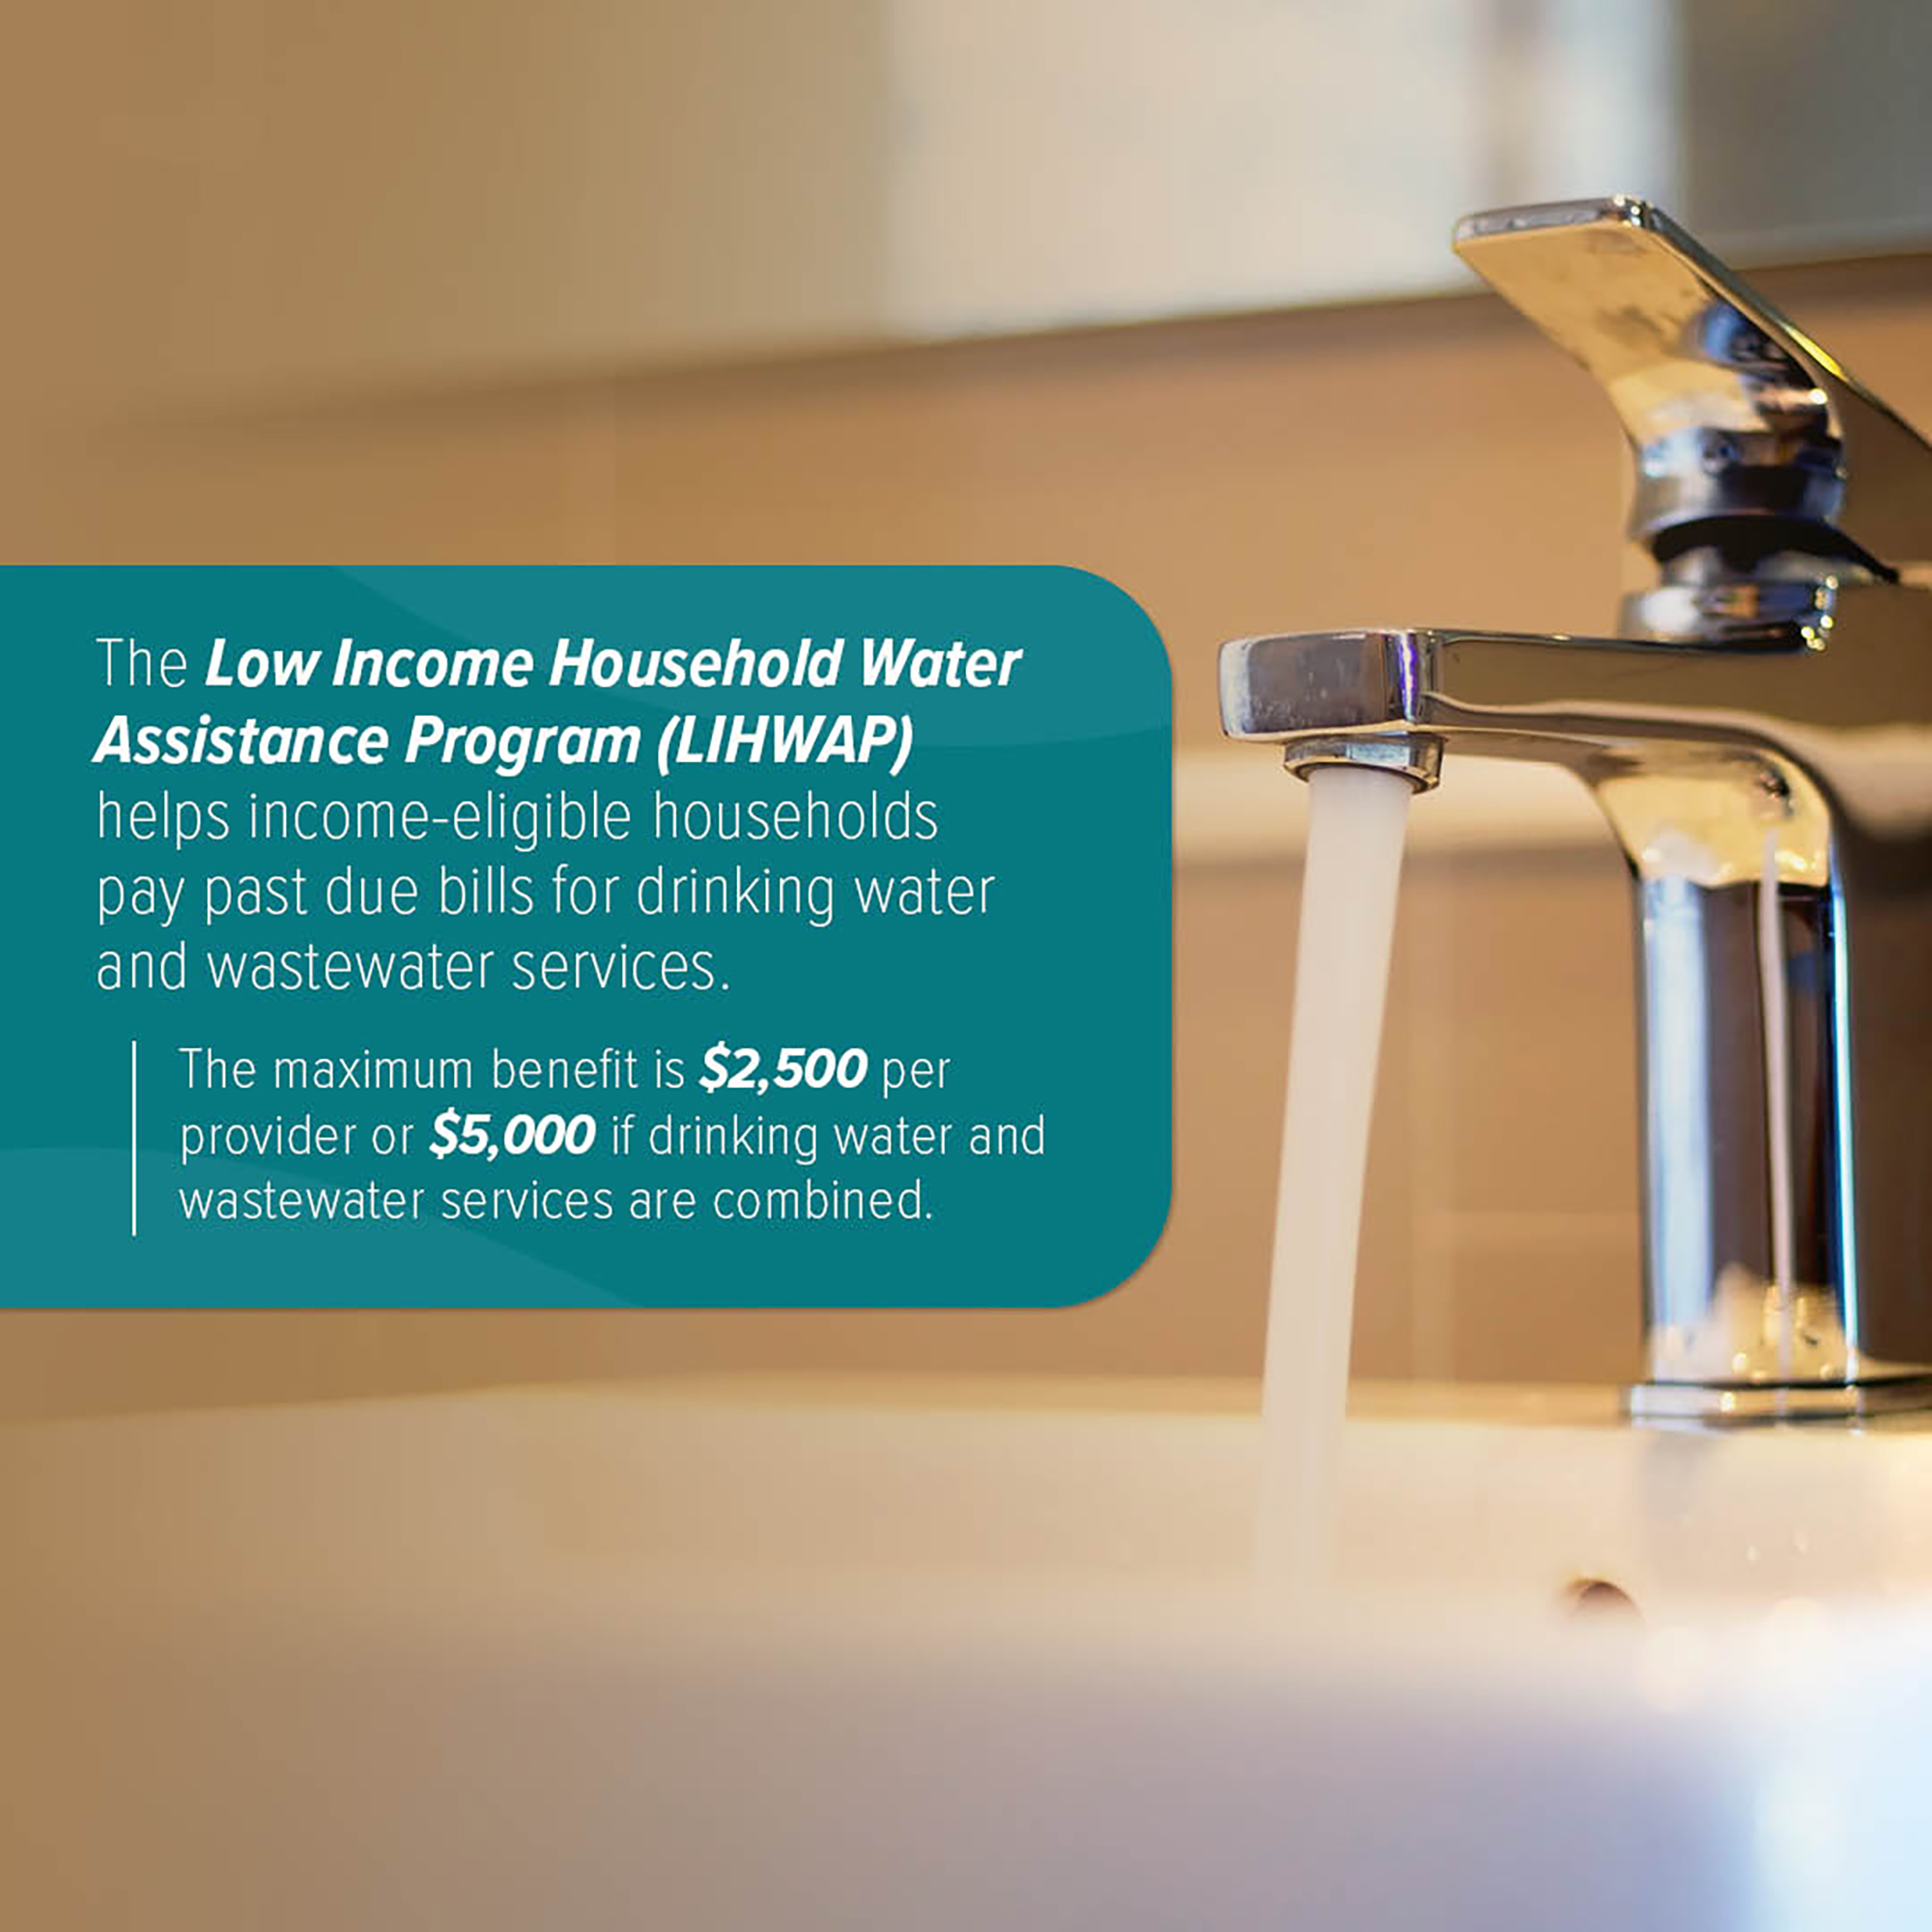 The Low Income Household Water Assistance Program